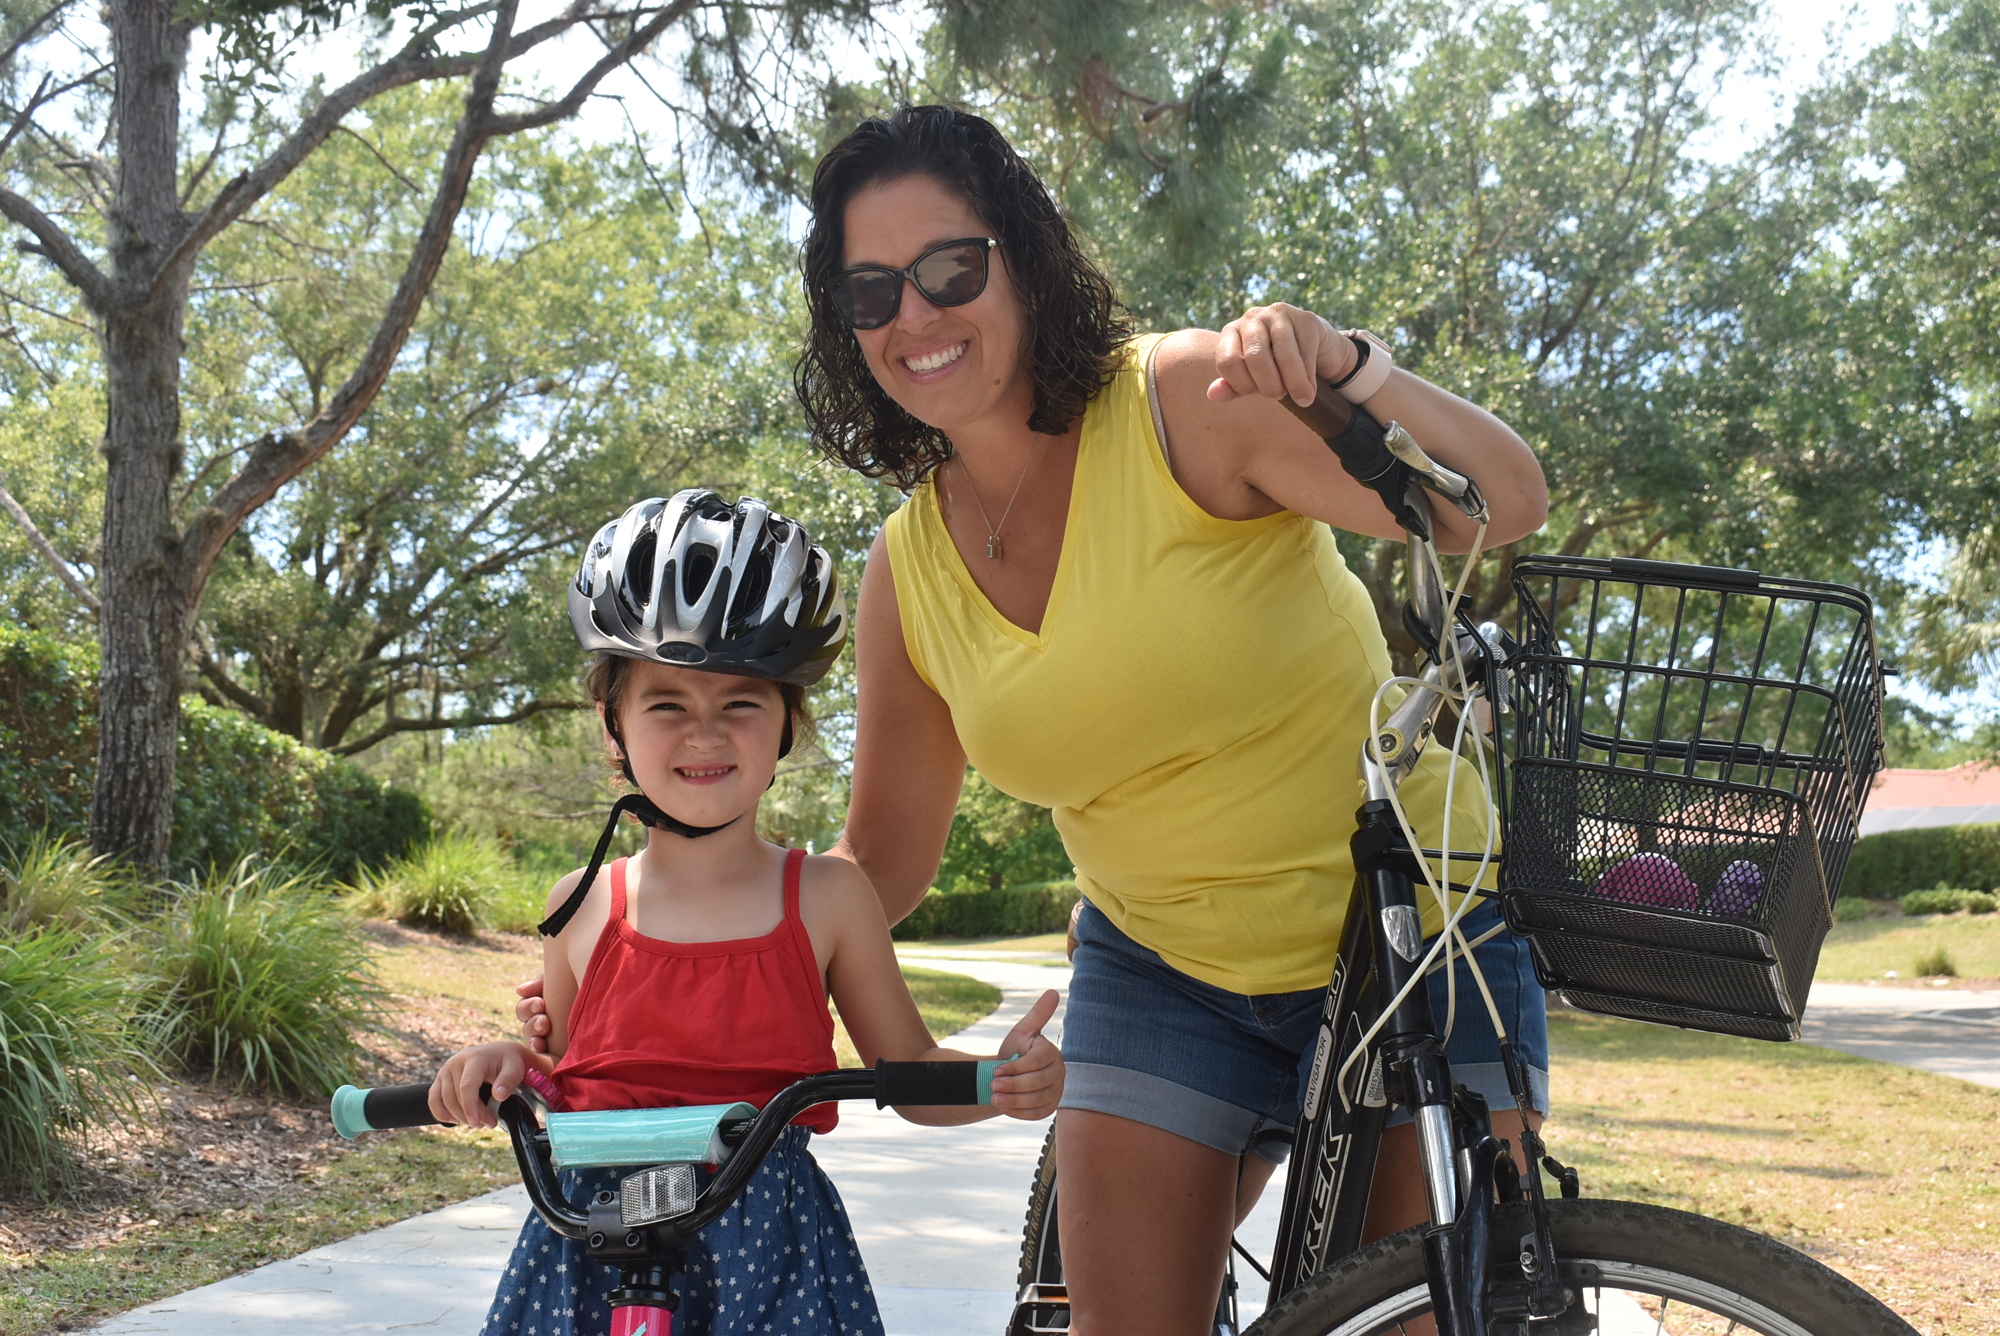 Greenbrook's Kim Pinto has prioritized providing normal and fun experiences, such as riding bikes with friends or swimming at the pool, for her 4-year-old daughter Lively Pinto.